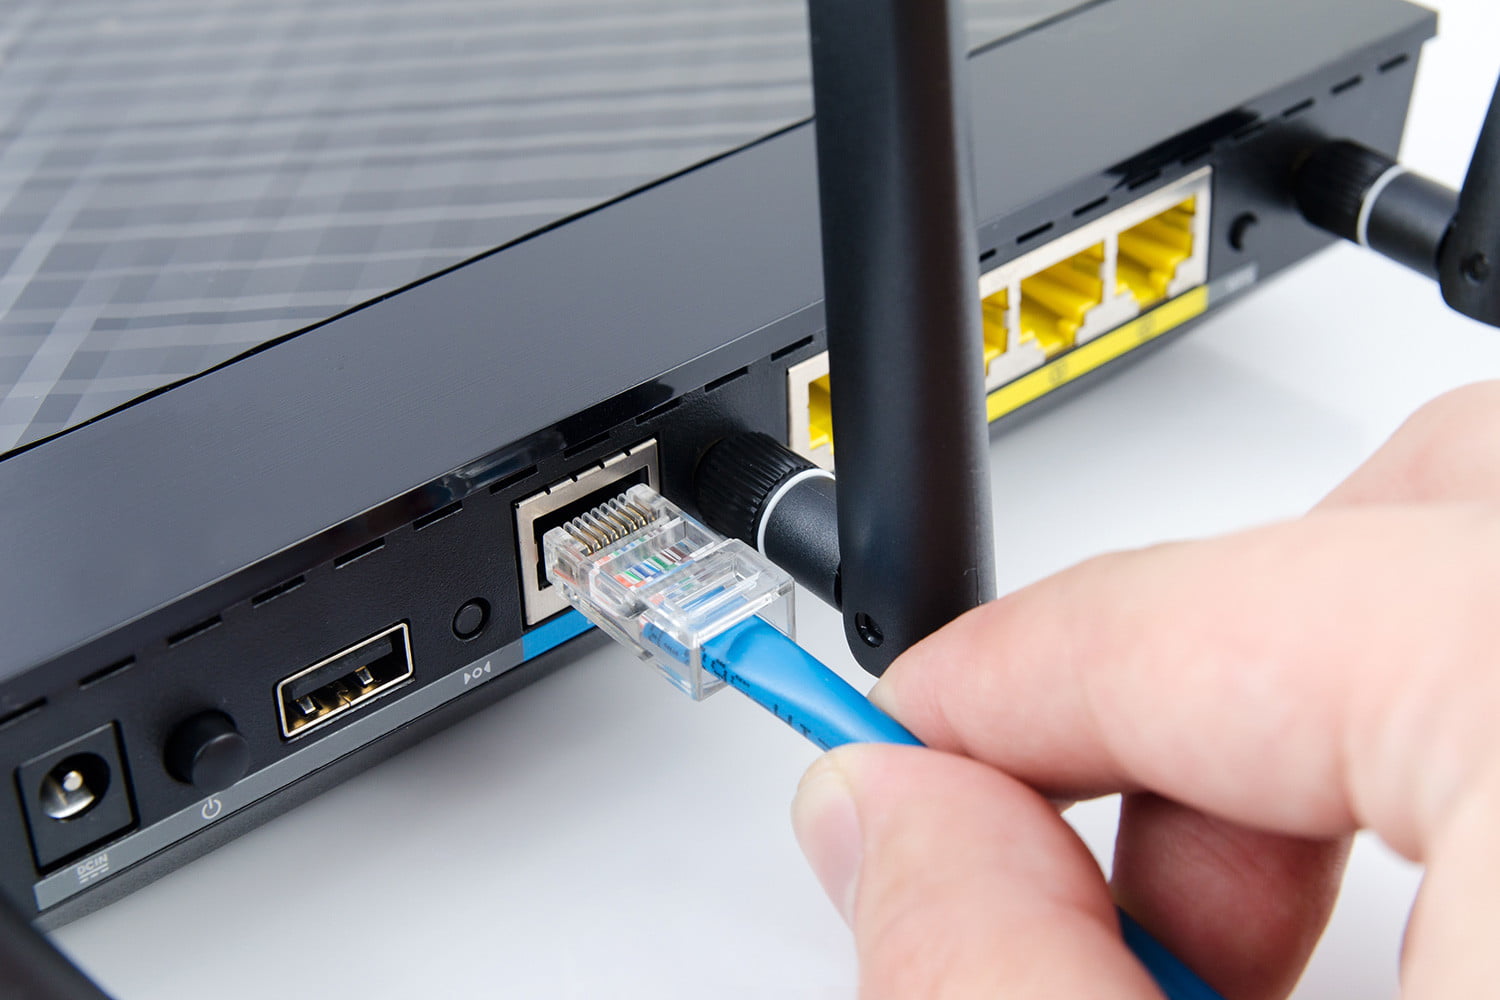 Did Gigabit Router Make a Difference?